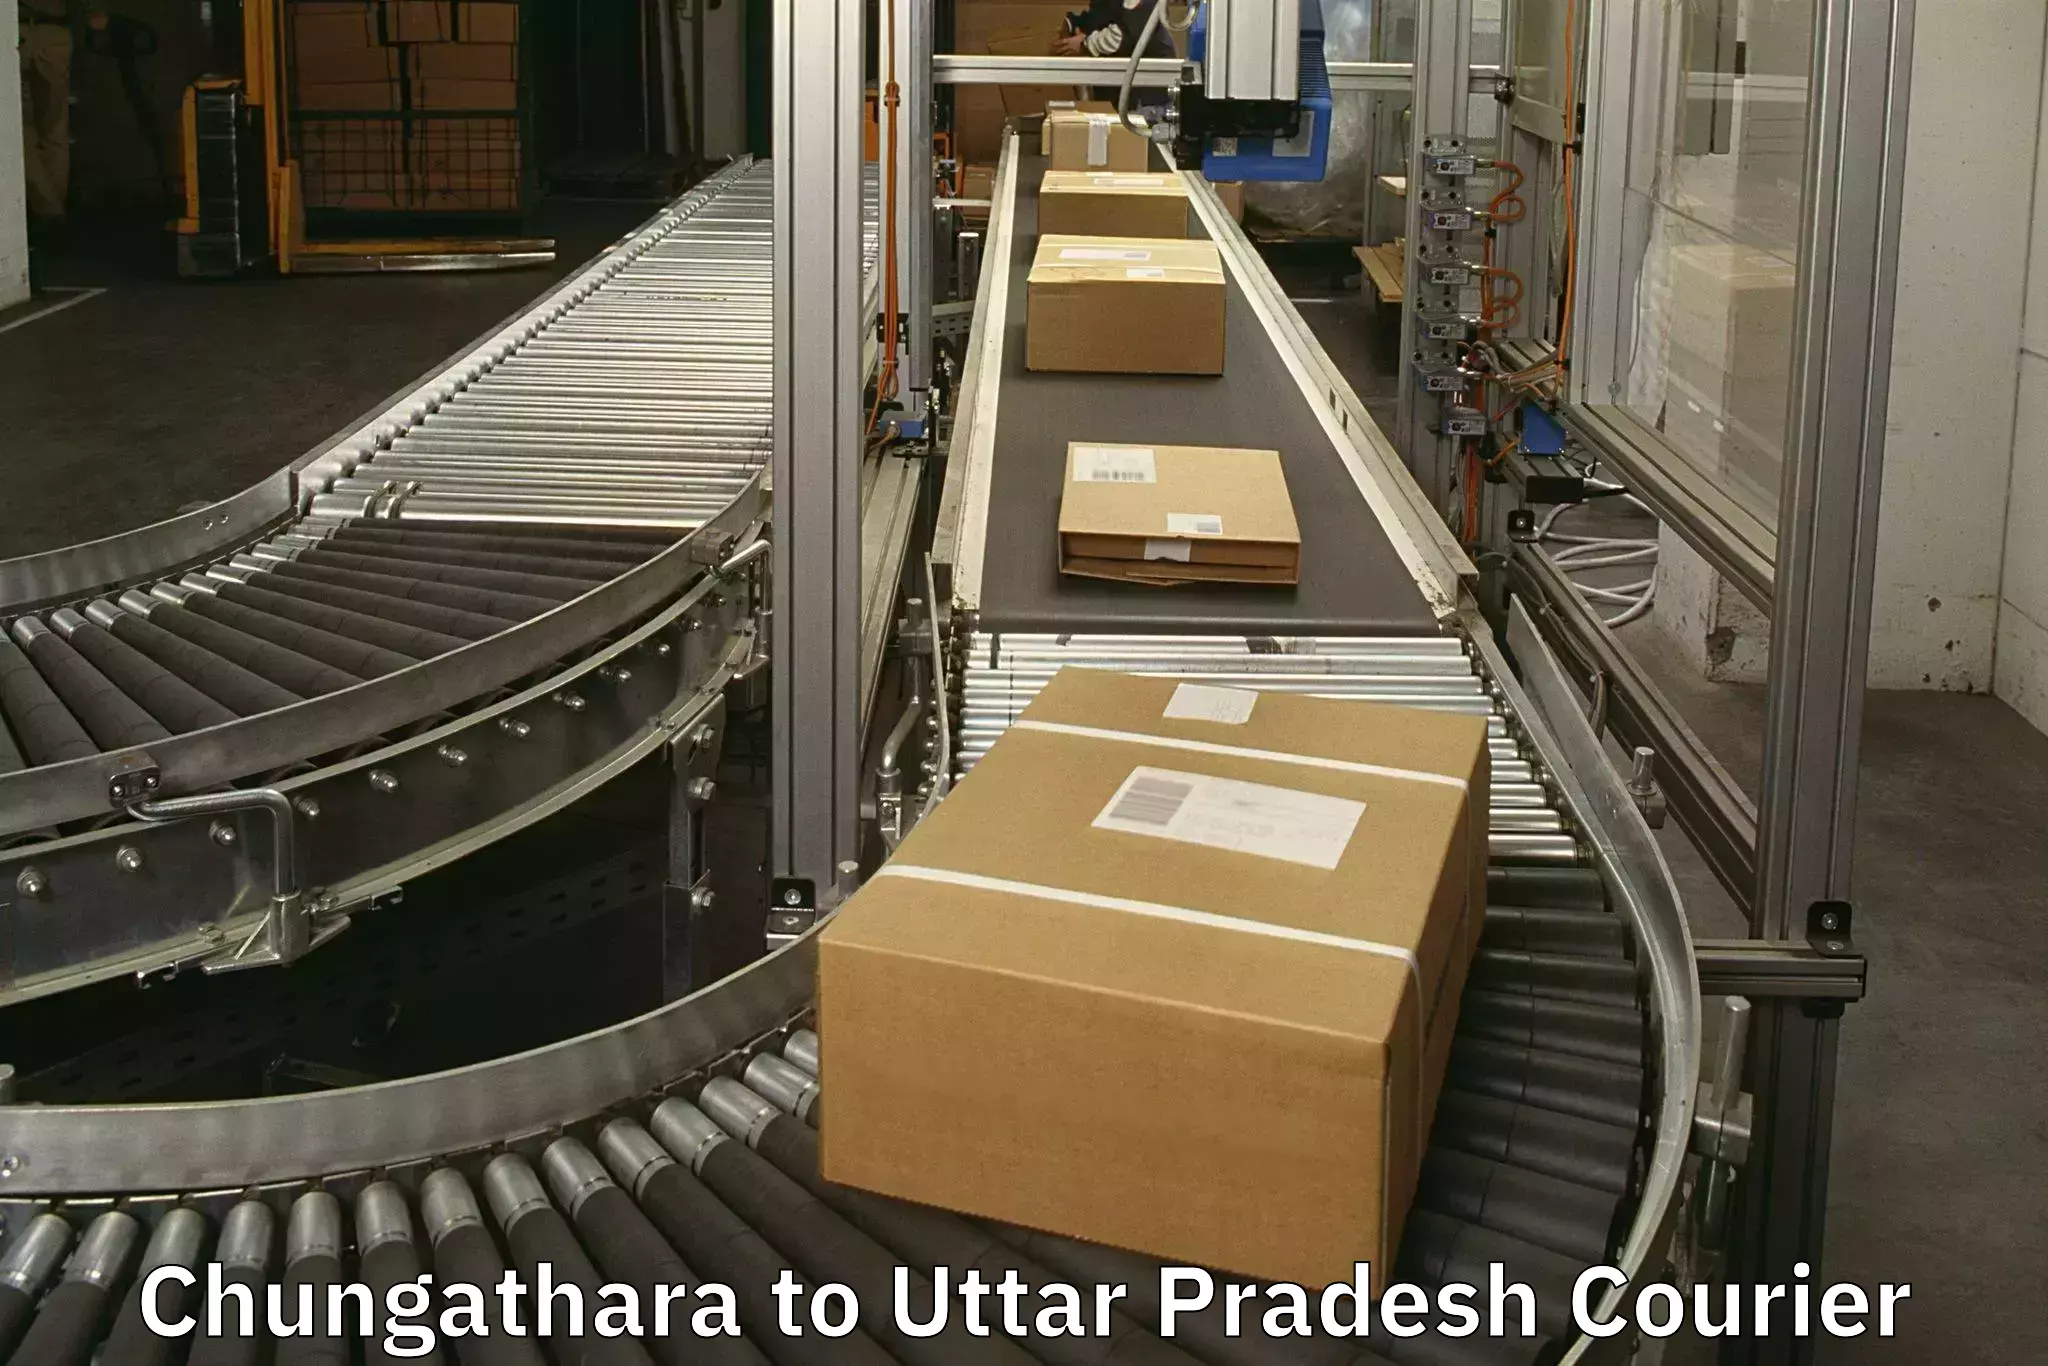 Baggage transport services in Chungathara to Agra